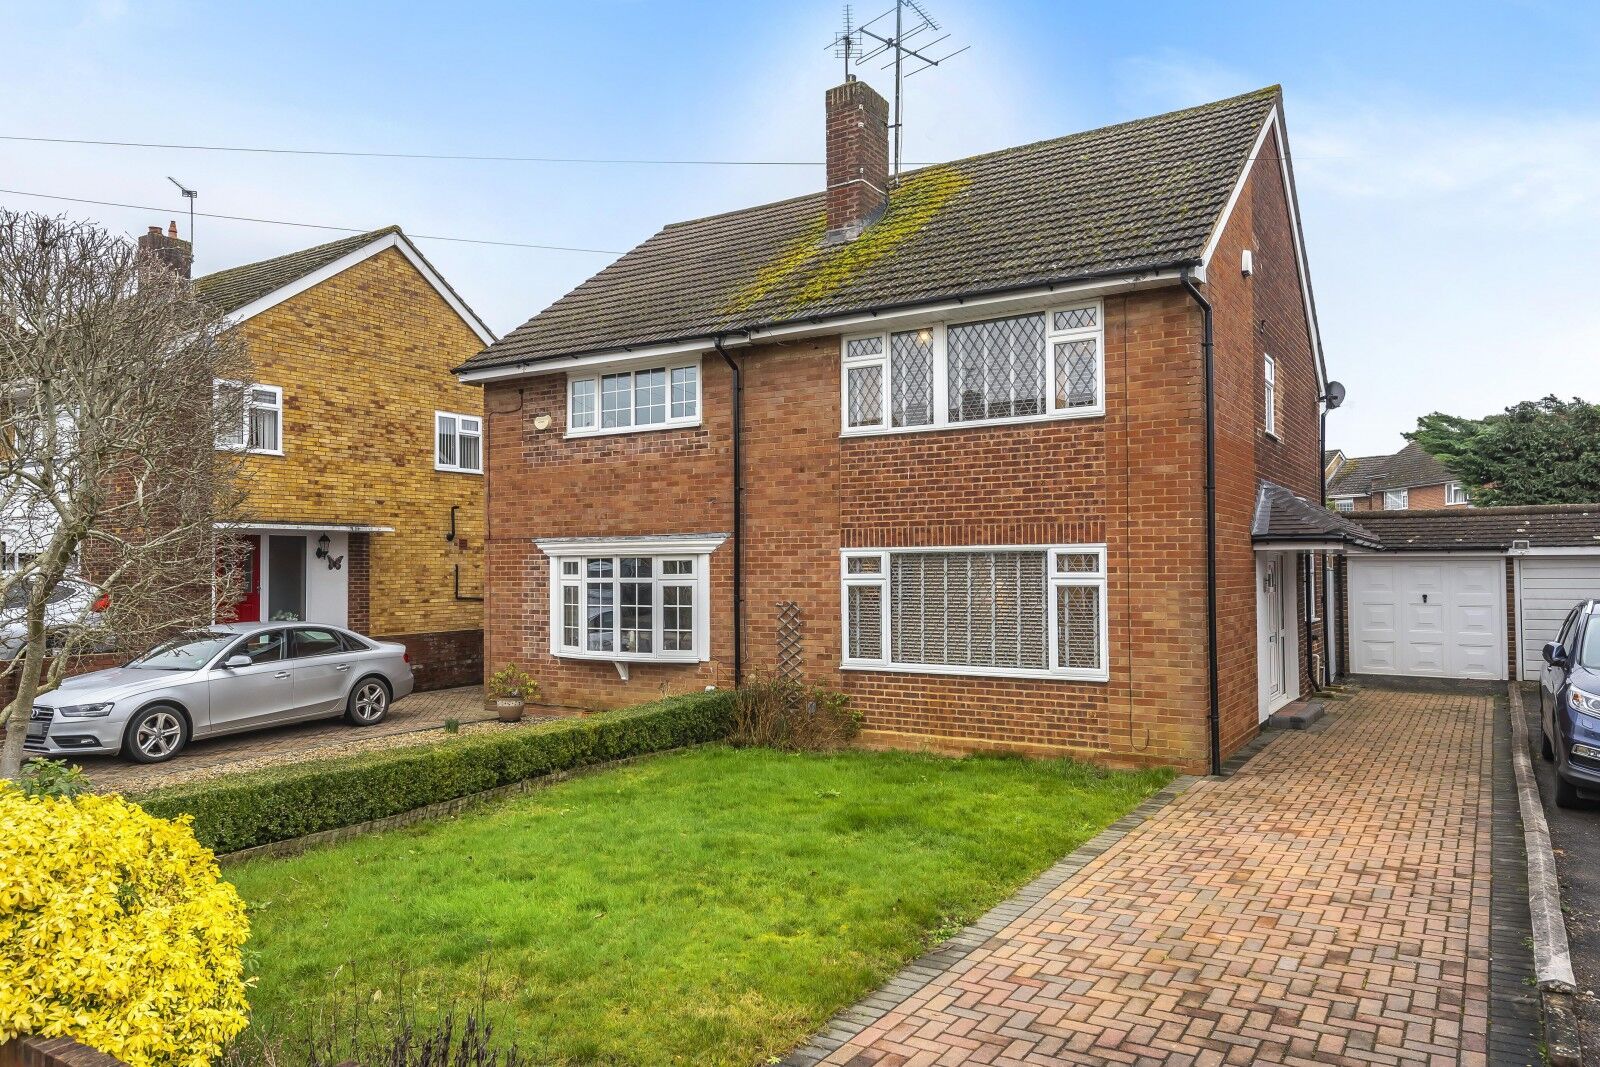 3 bedroom semi detached house for sale Shrubland Drive, Reading, RG30, main image